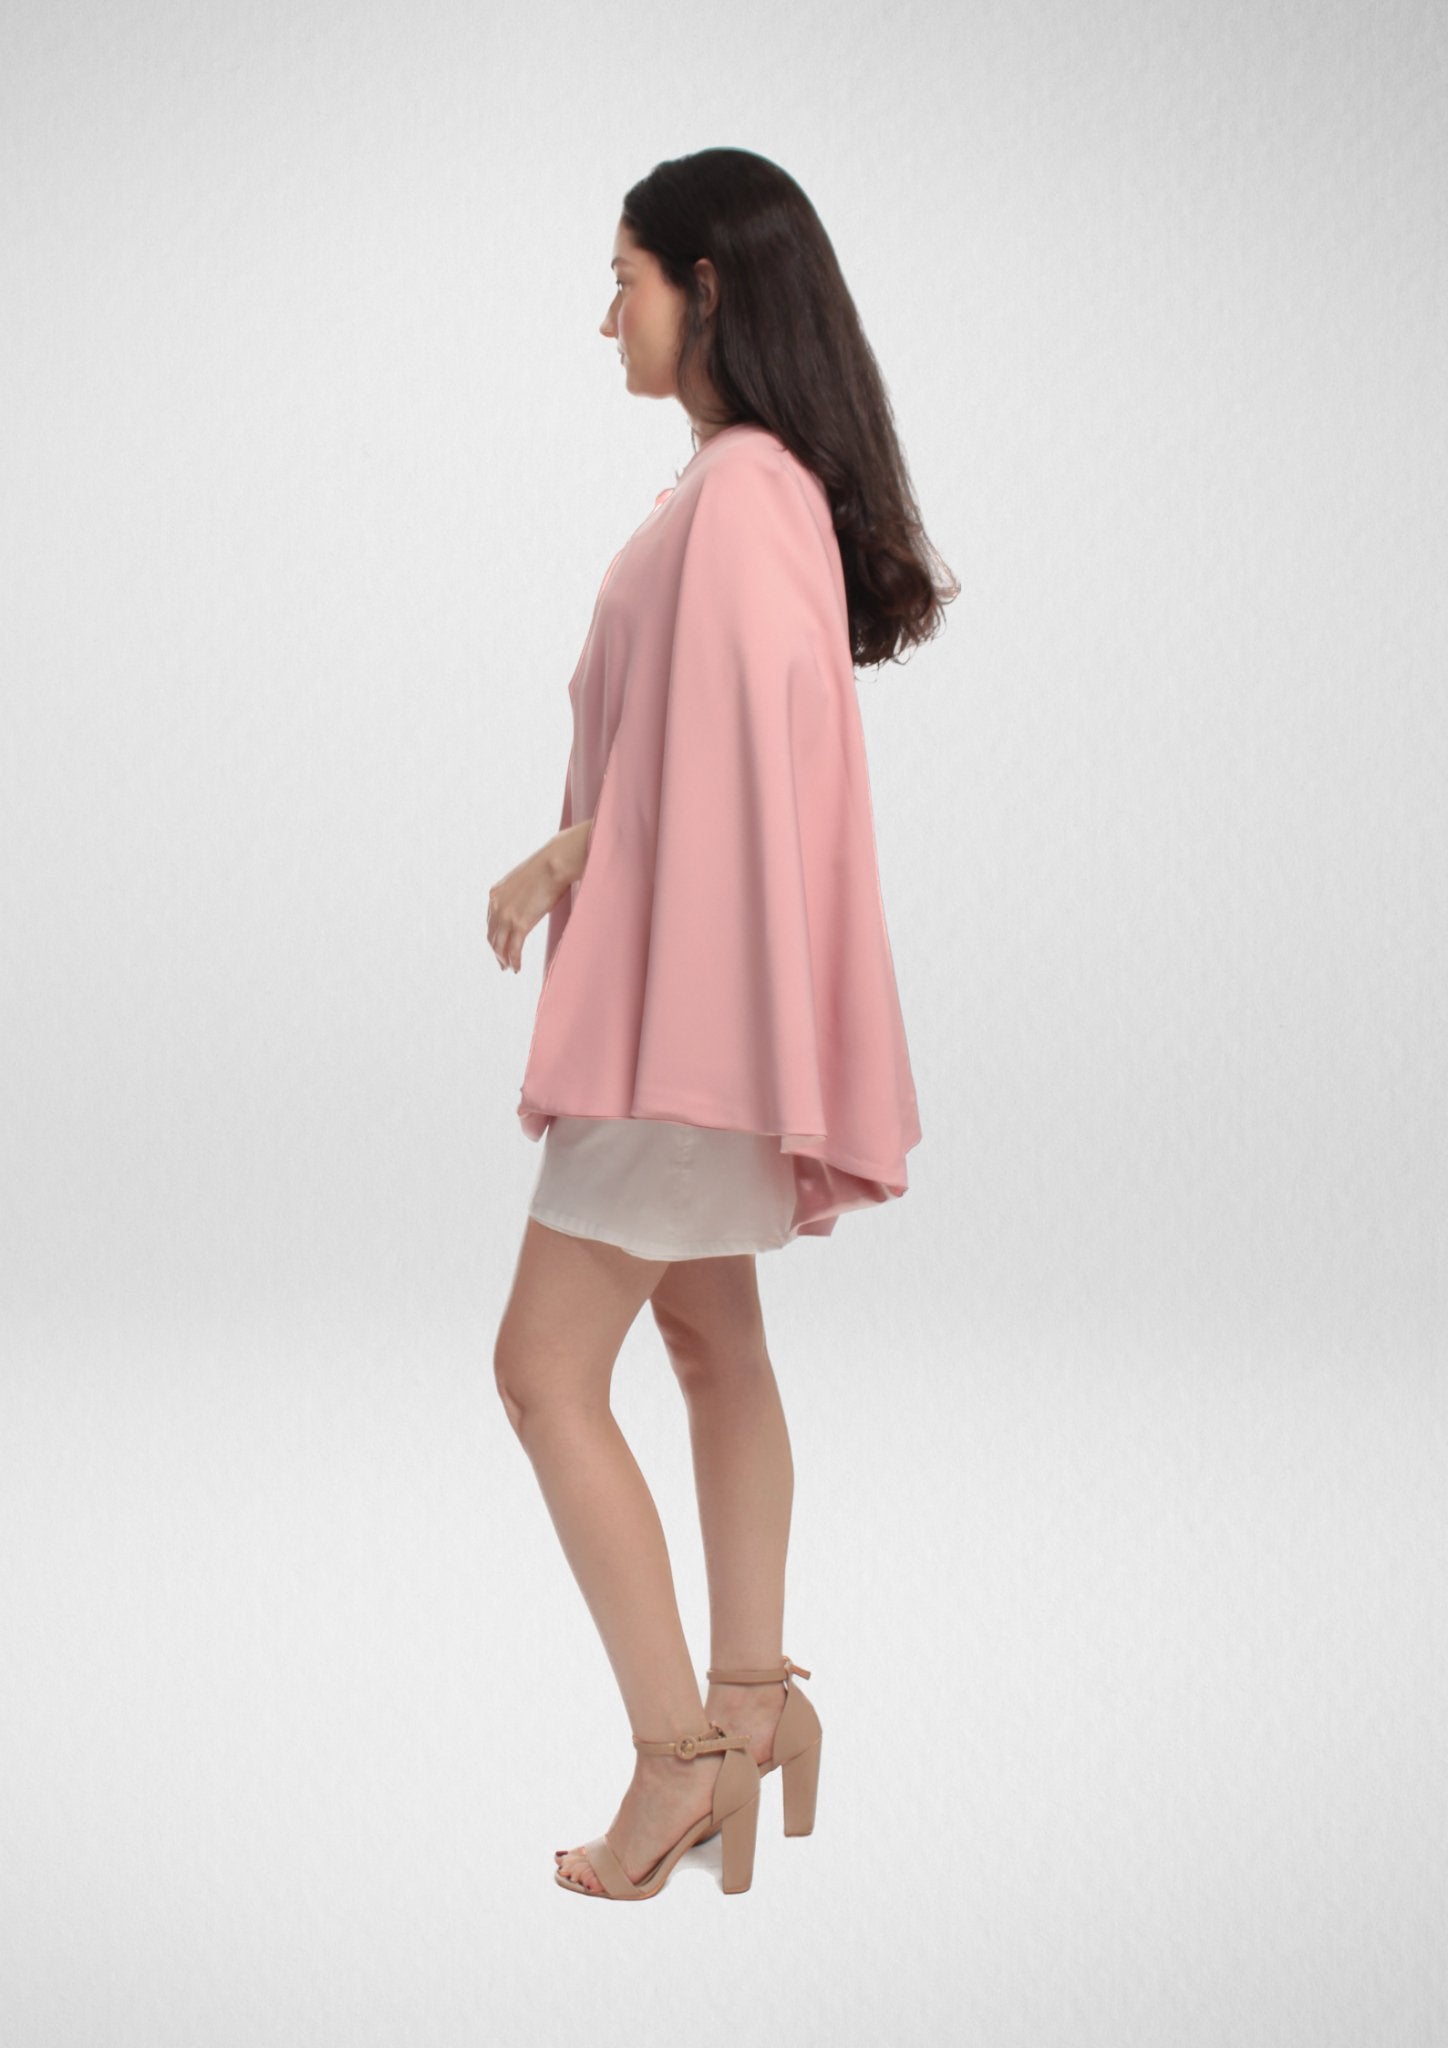 Long Elegant Cape Sewing Pattern [Lucy] - Friedlies